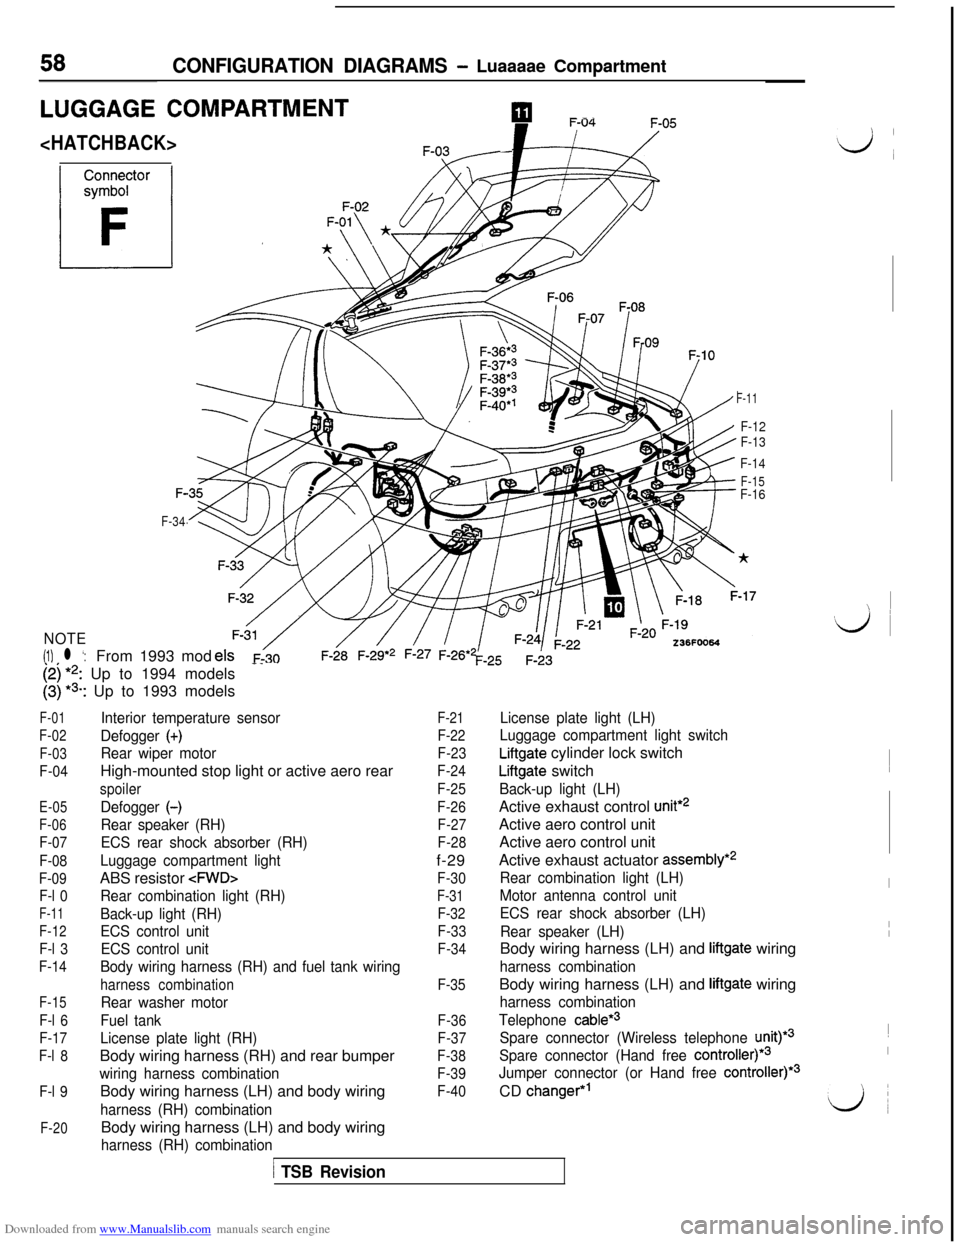 MITSUBISHI 3000GT 1994 2.G Repair Manual Downloaded from www.Manualslib.com manuals search engine 58CONFIGURATION DIAGRAMS - Luaaaae Compartment
LUGGAGE COMPARTMENTpIl --.
<HATCHBACK>-
F-11
F-12
F-13
F-14
F-15F-F-16
F-34
NOTE
(1) l ‘:From 